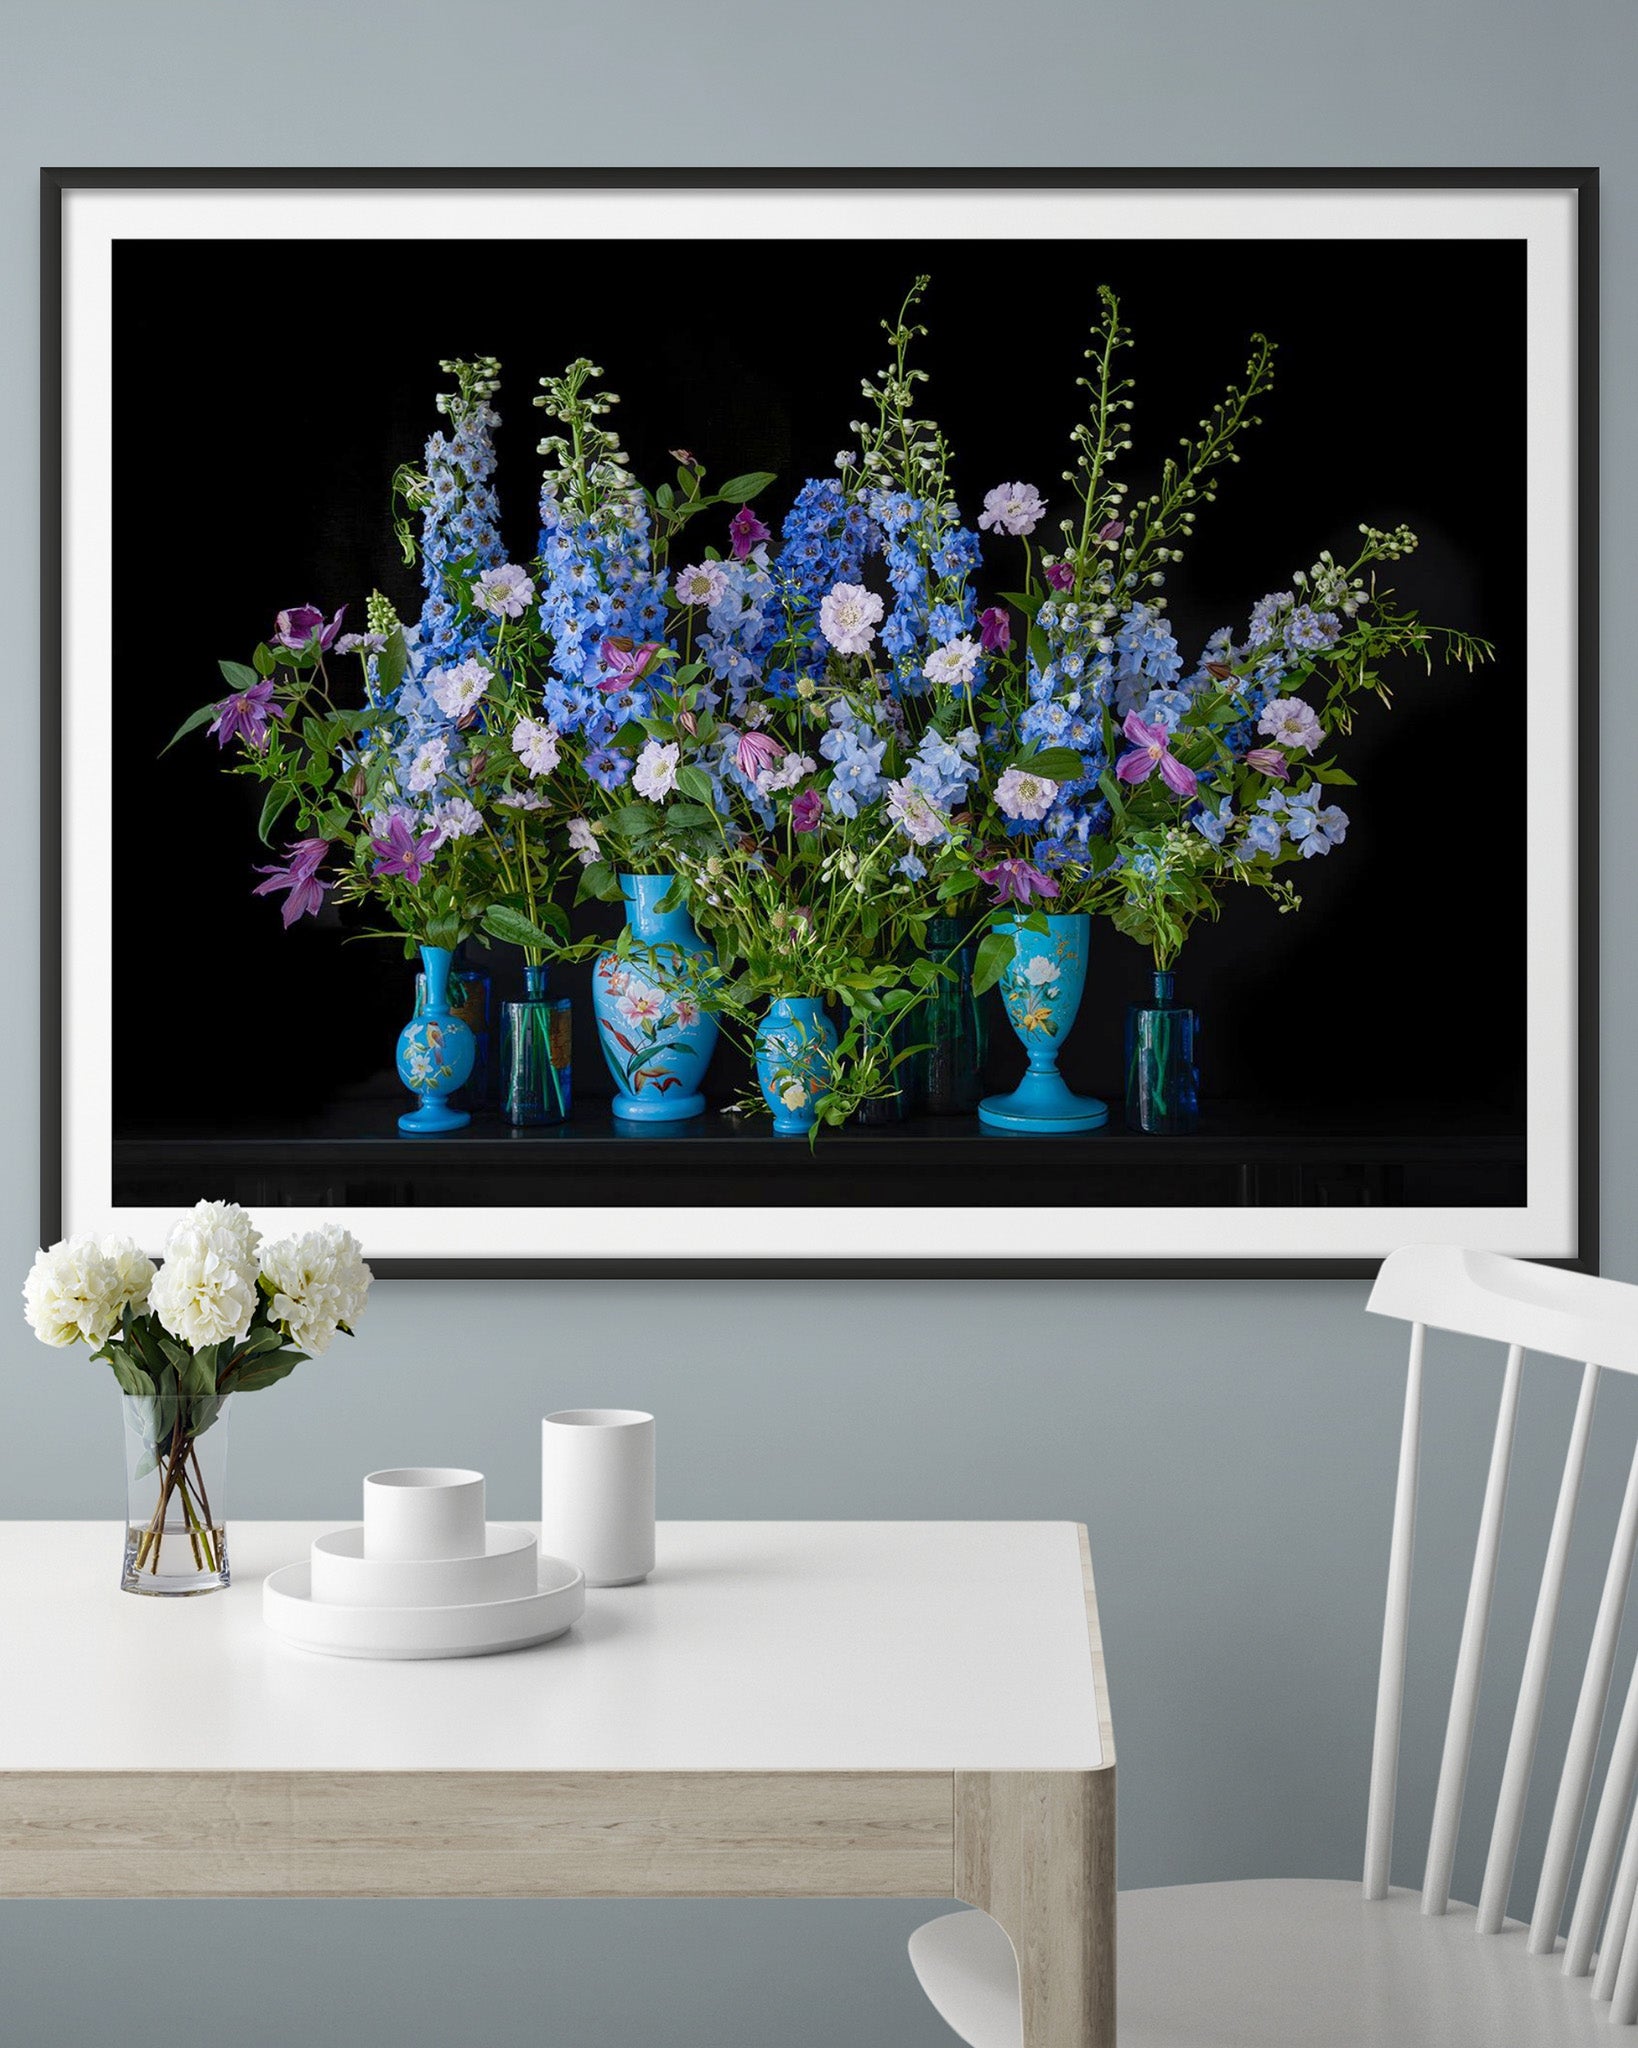 Extra Large Framed Limited Edition Photographic Flower Print 'DELPHINE' hung above a White Table on Farrow & Ball Parma Gray Wall.